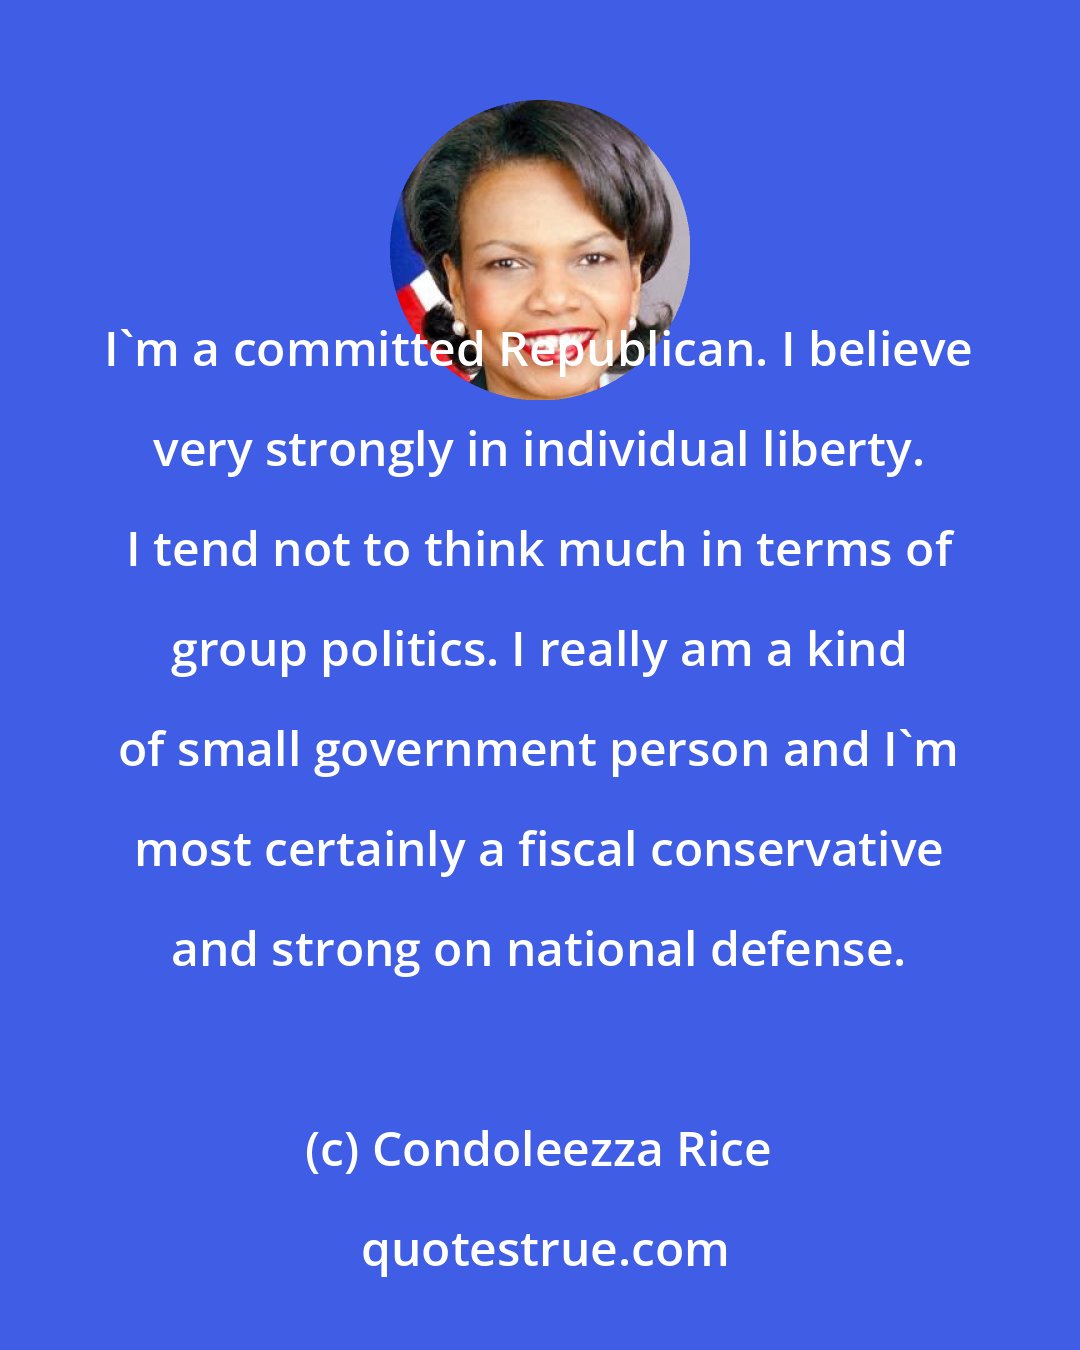 Condoleezza Rice: I'm a committed Republican. I believe very strongly in individual liberty. I tend not to think much in terms of group politics. I really am a kind of small government person and I'm most certainly a fiscal conservative and strong on national defense.